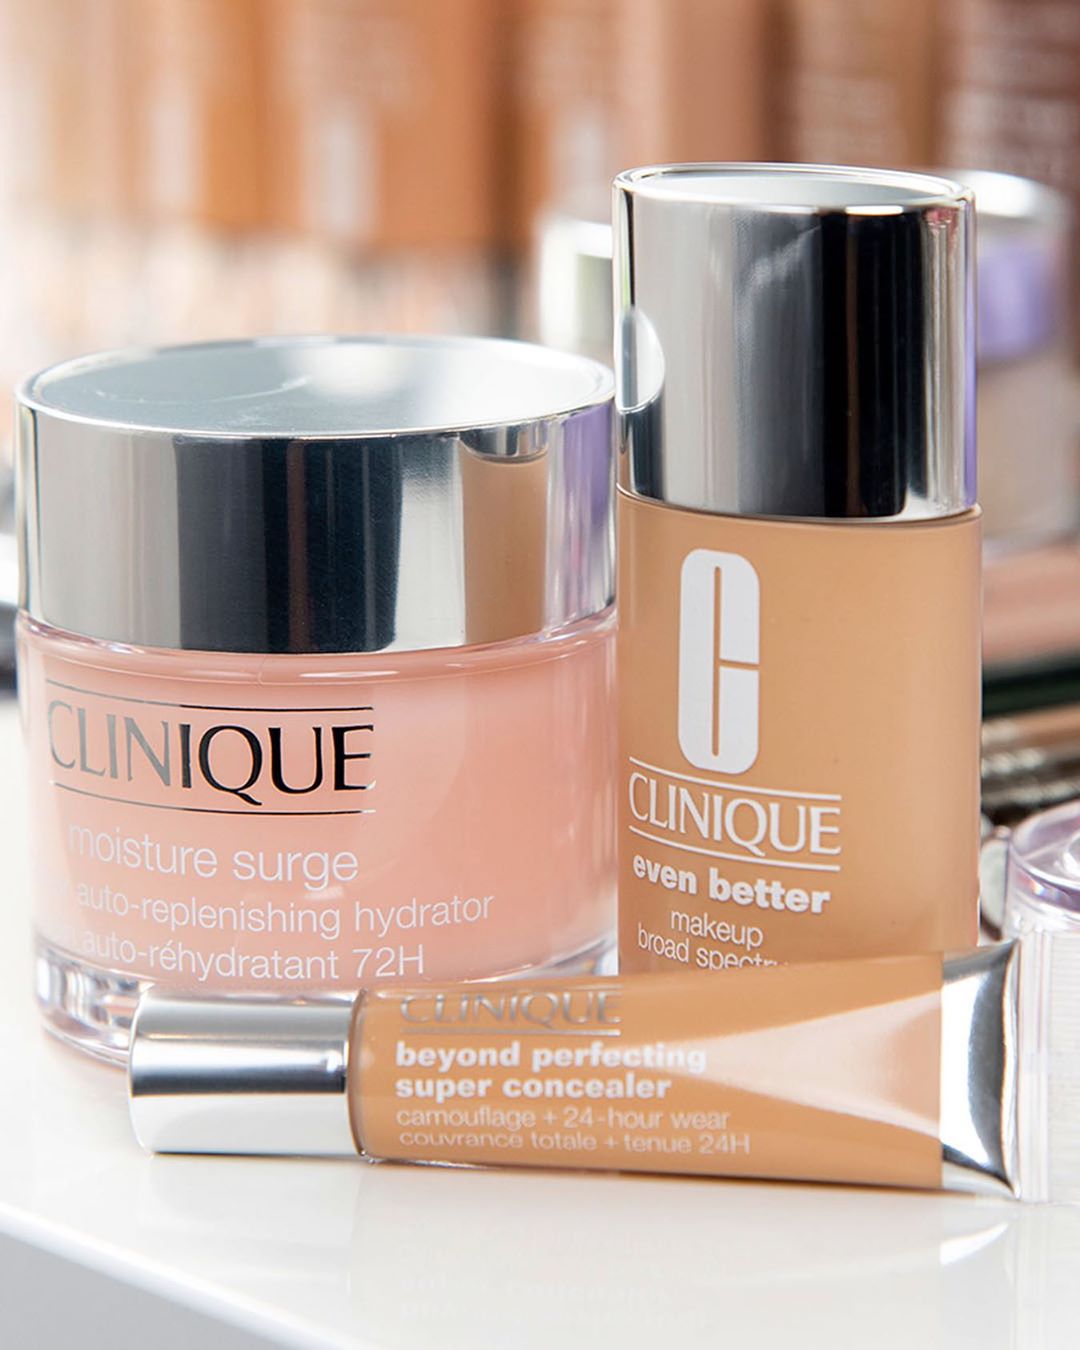 Clinique - A perfect Clinique trio 💕 

✔️ Moisture Surge 72-Hour to hydrate + prep
✔️ Even Better Makeup 24-hour flawless coverage 
✔️ Beyond Perfecting Super Concealer covers up all day with hydratio...